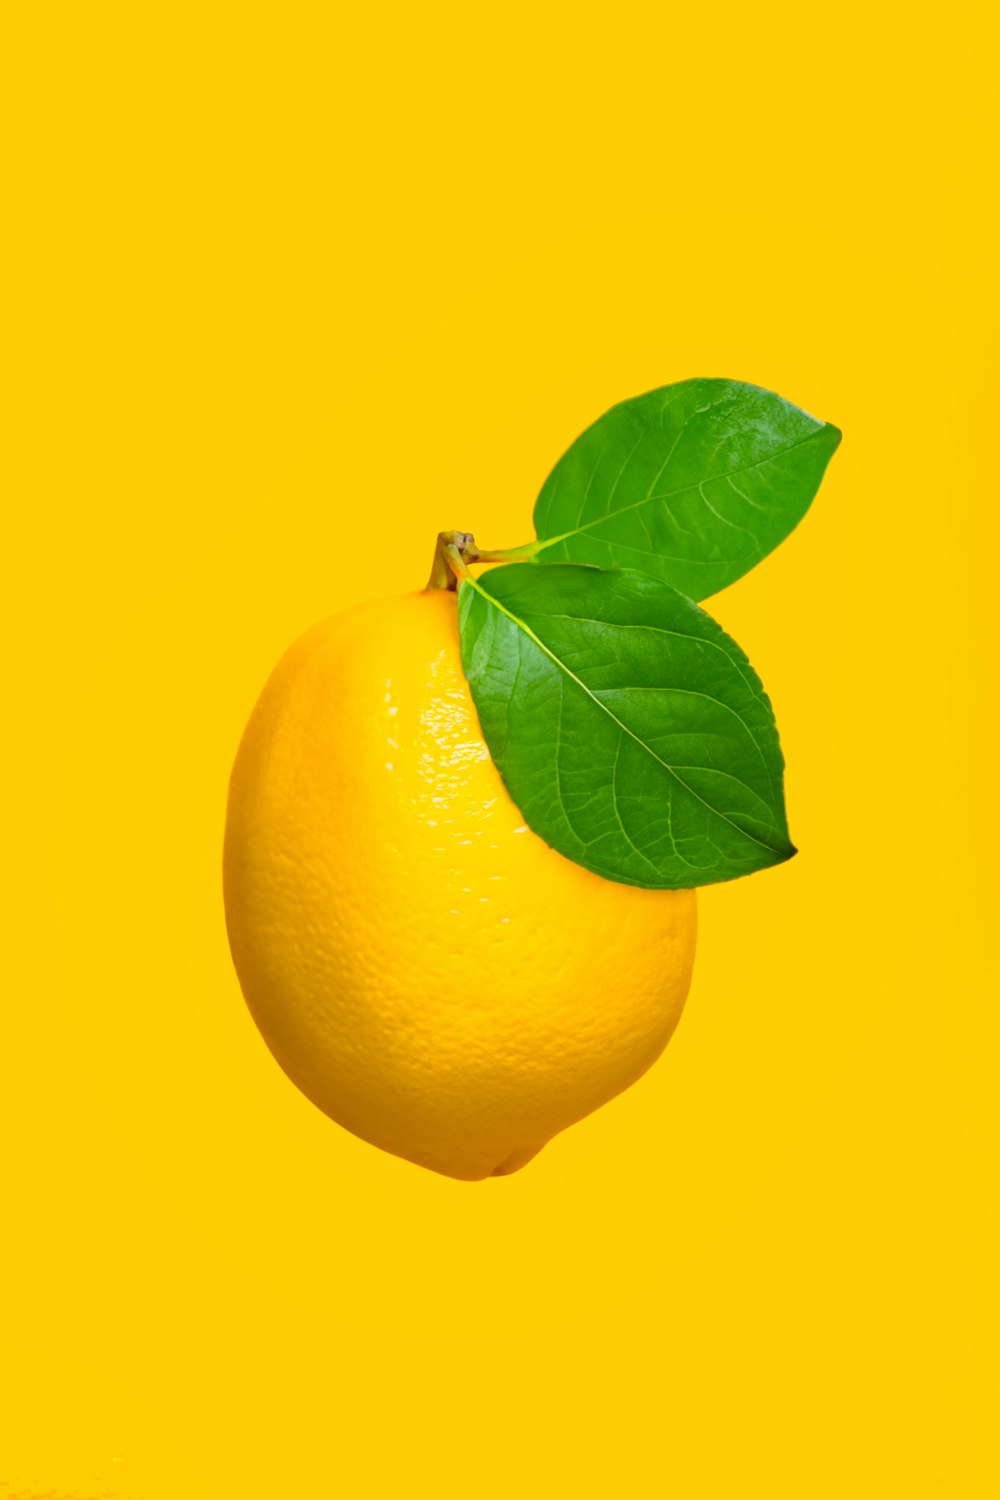 a lemon with a green leaf on a yellow background